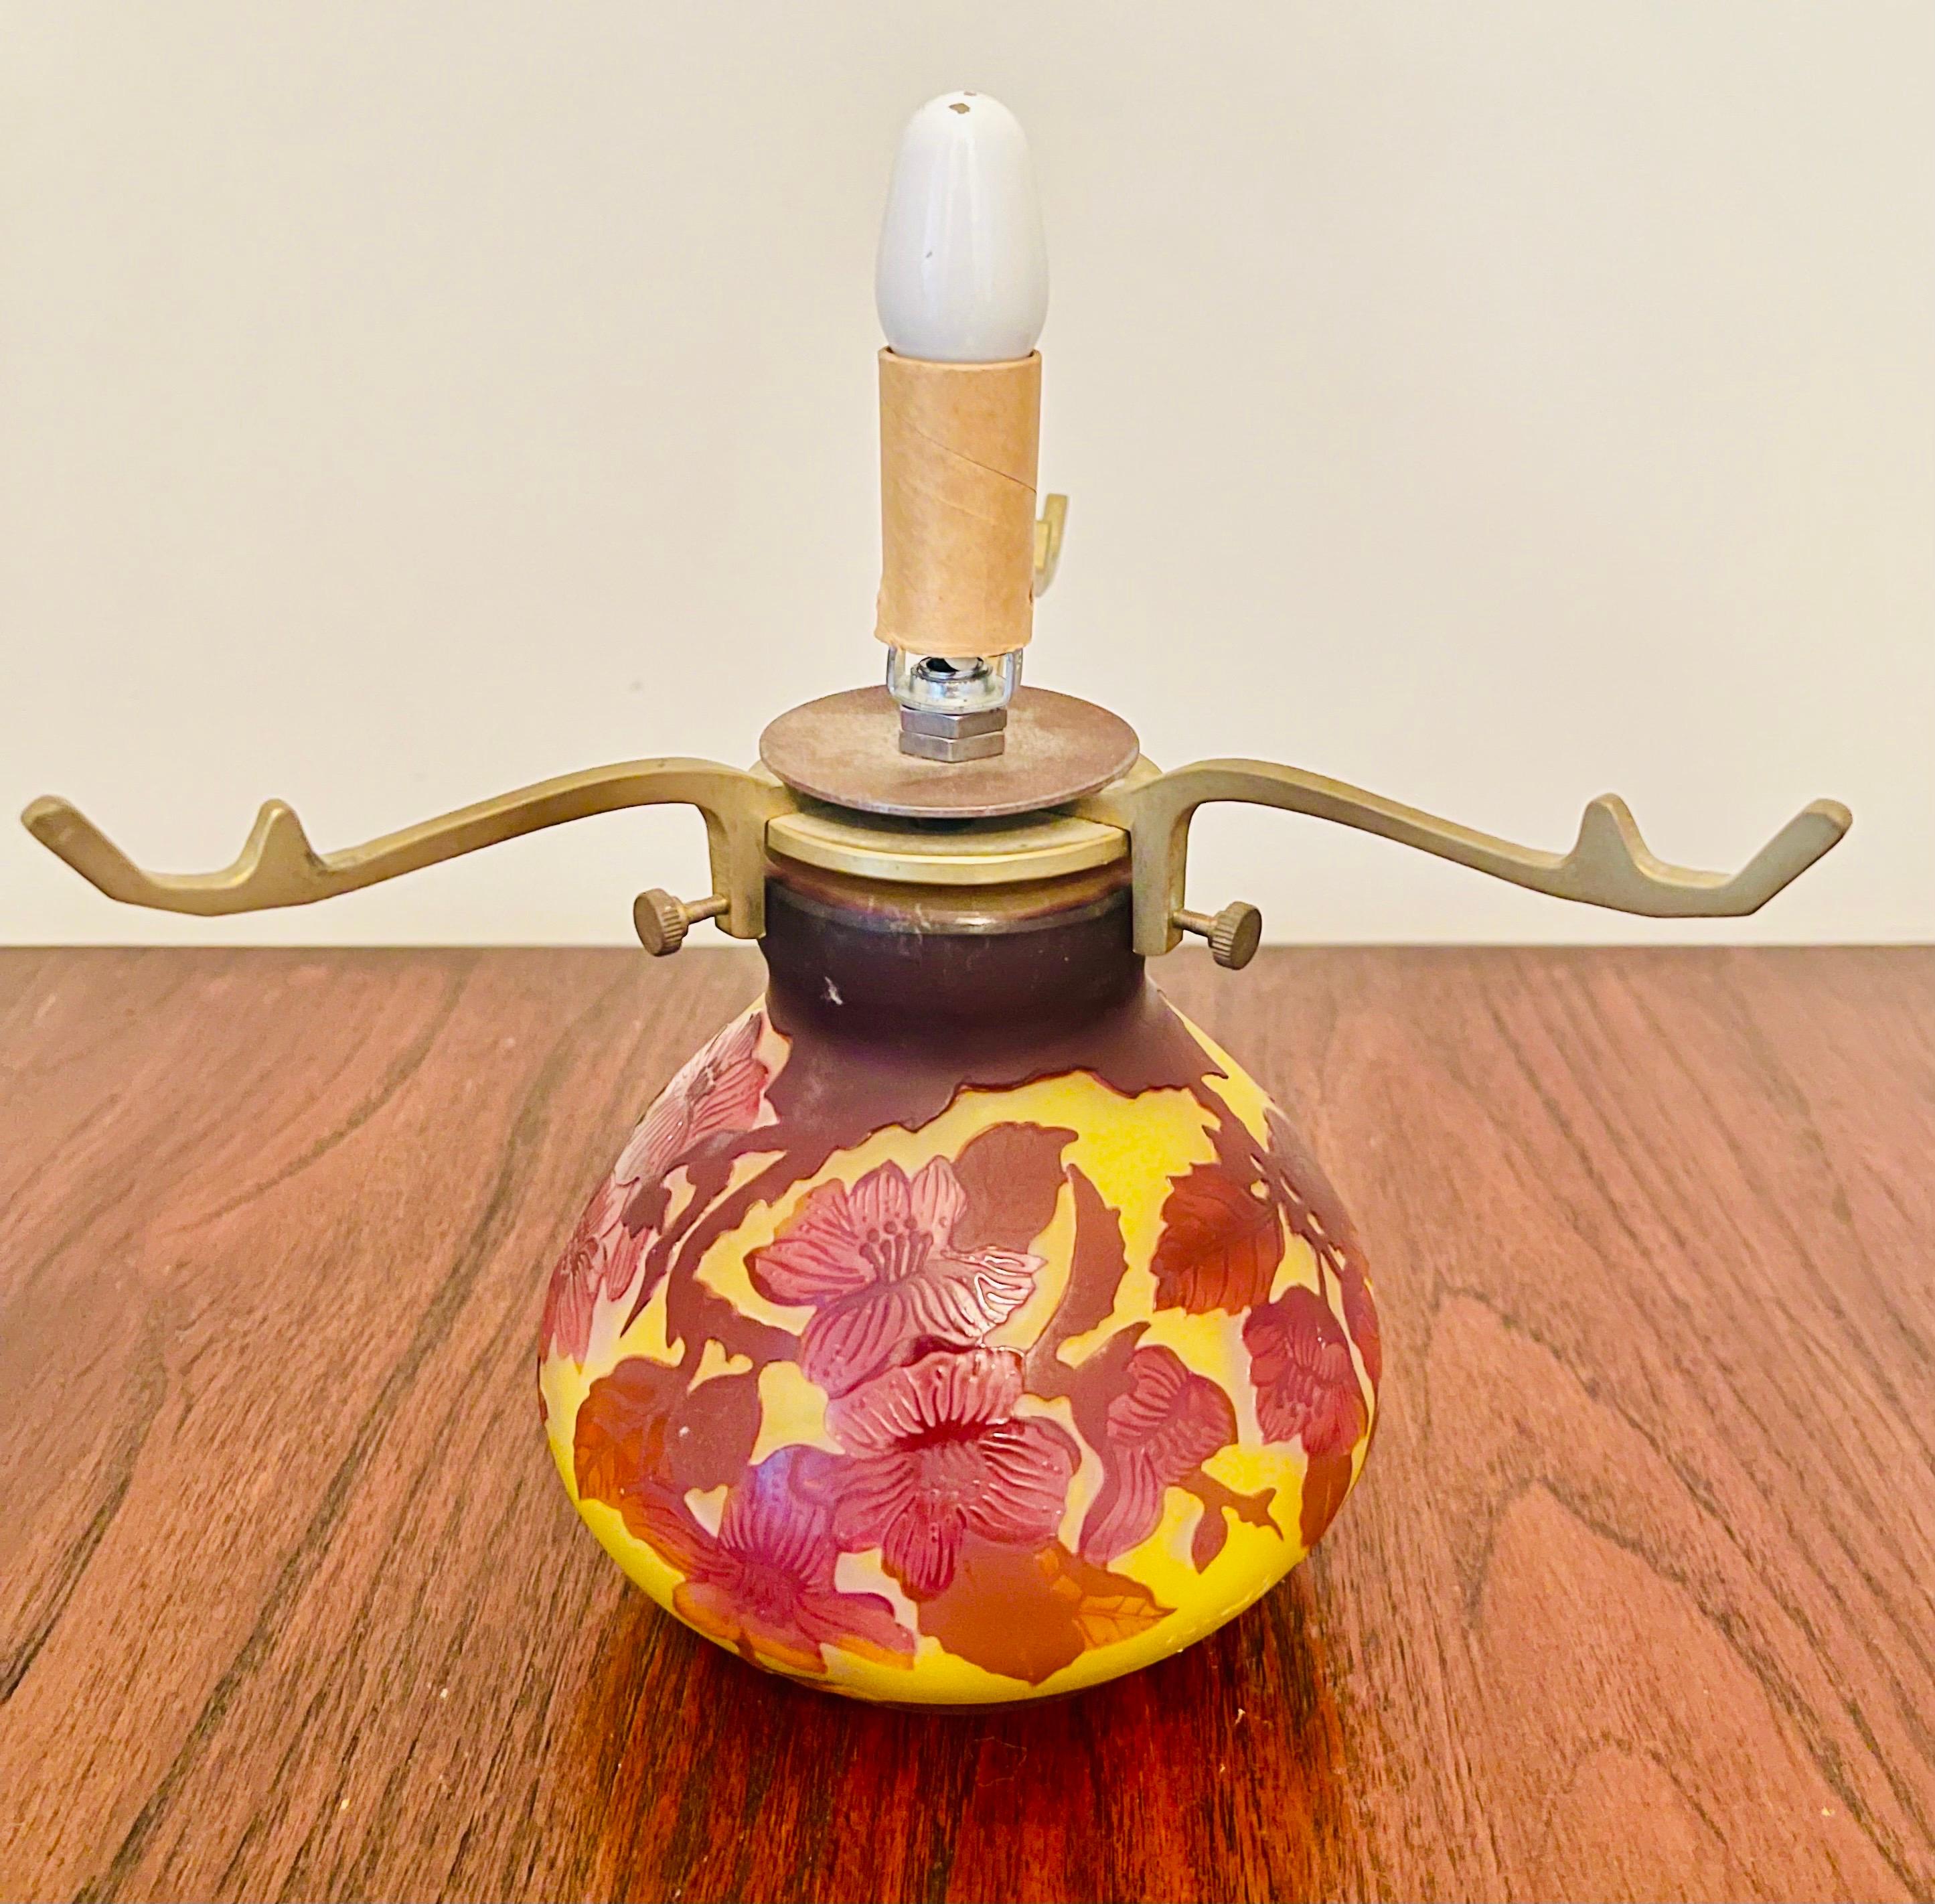 This exquisite piece of art is a signed Emile Galle cameo glass windowpane floral Art Nouveau vase that looks like it has been transformed to a table lamp, although we are unclear where the electricity is, and note that it is being sold exactly as